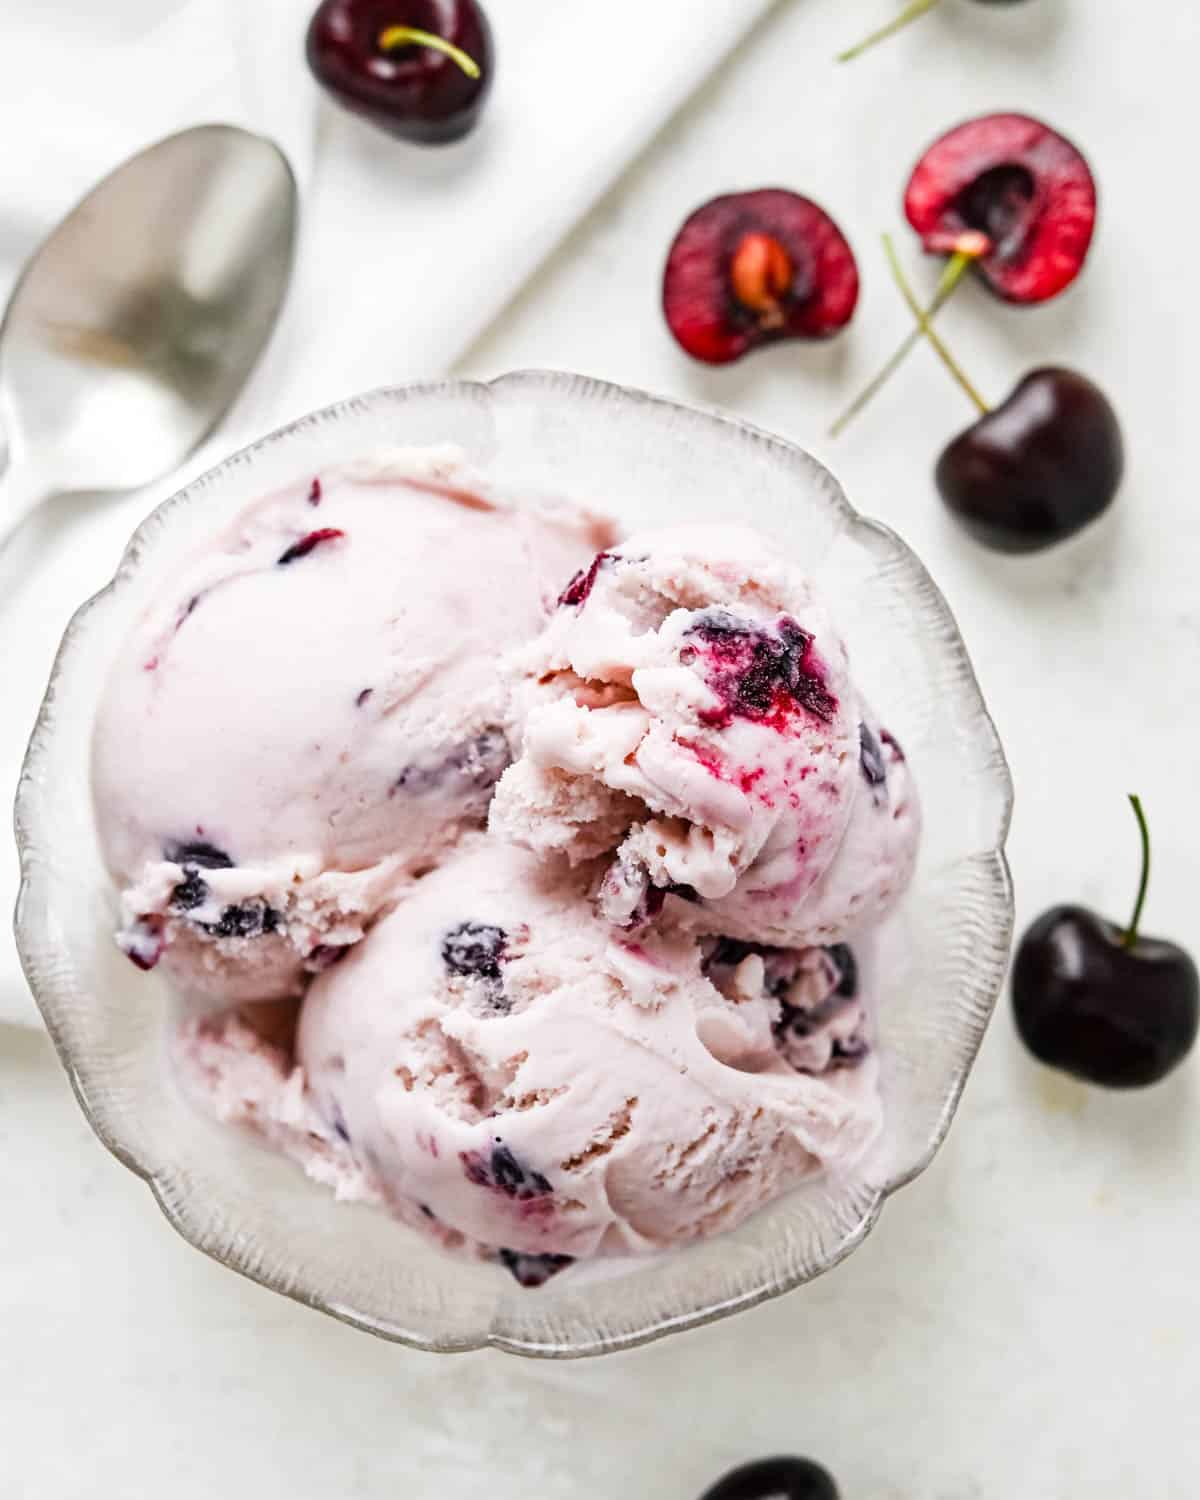 Three scoops of cherry ice cream in a glass bowl.